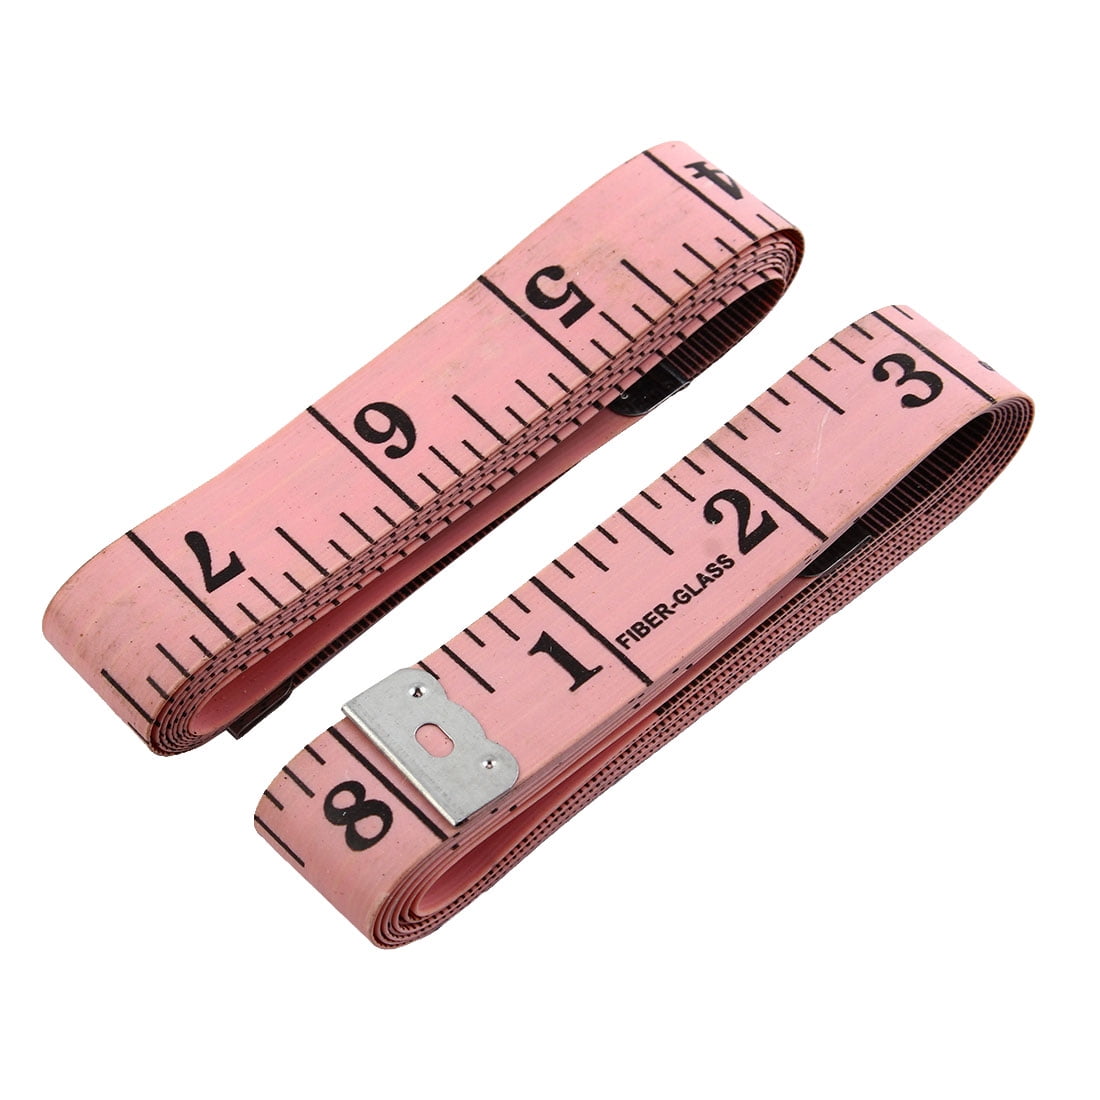 Sewing / Tailors Tape Measure 150cm - PINK